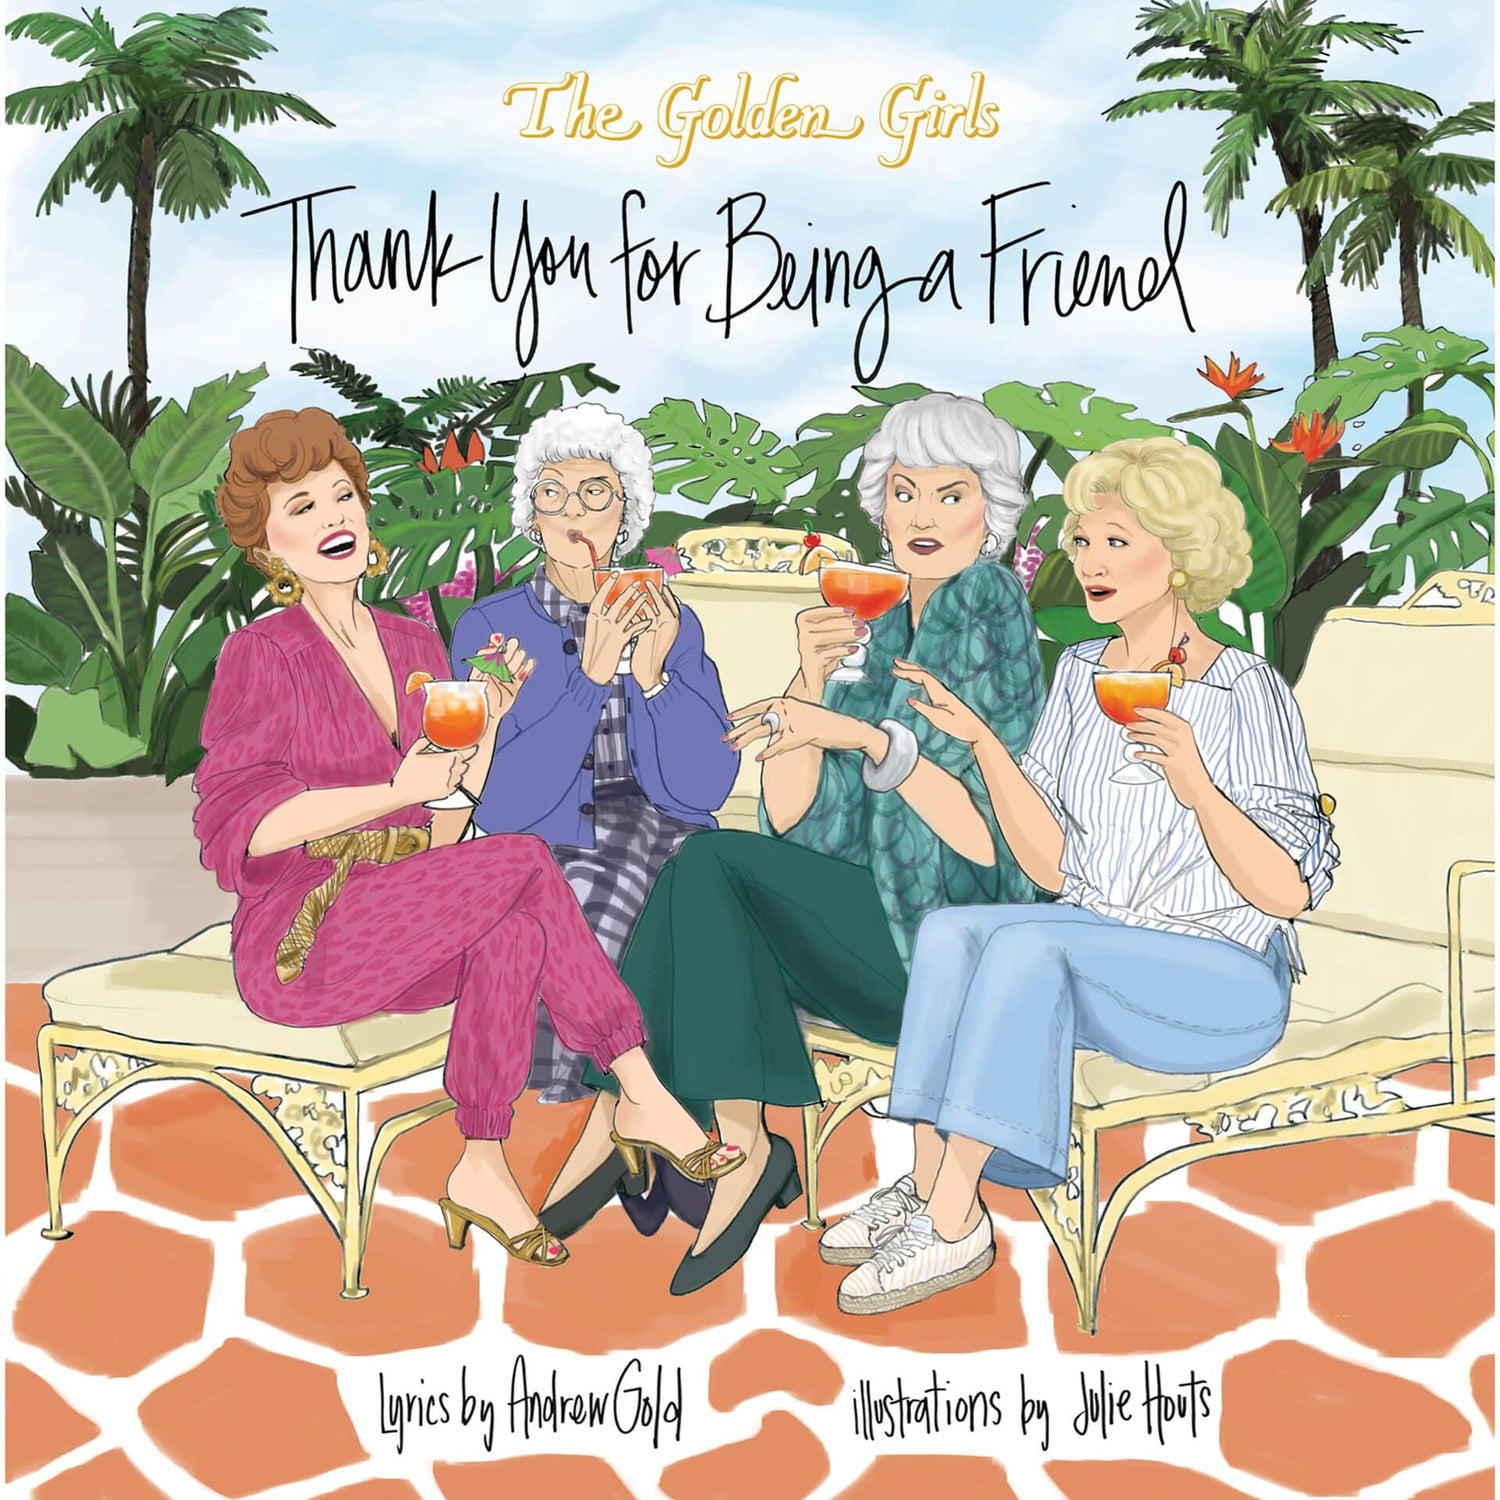 The Golden Girls: Thank You for Being a Friend Book - Findlay Rowe Designs